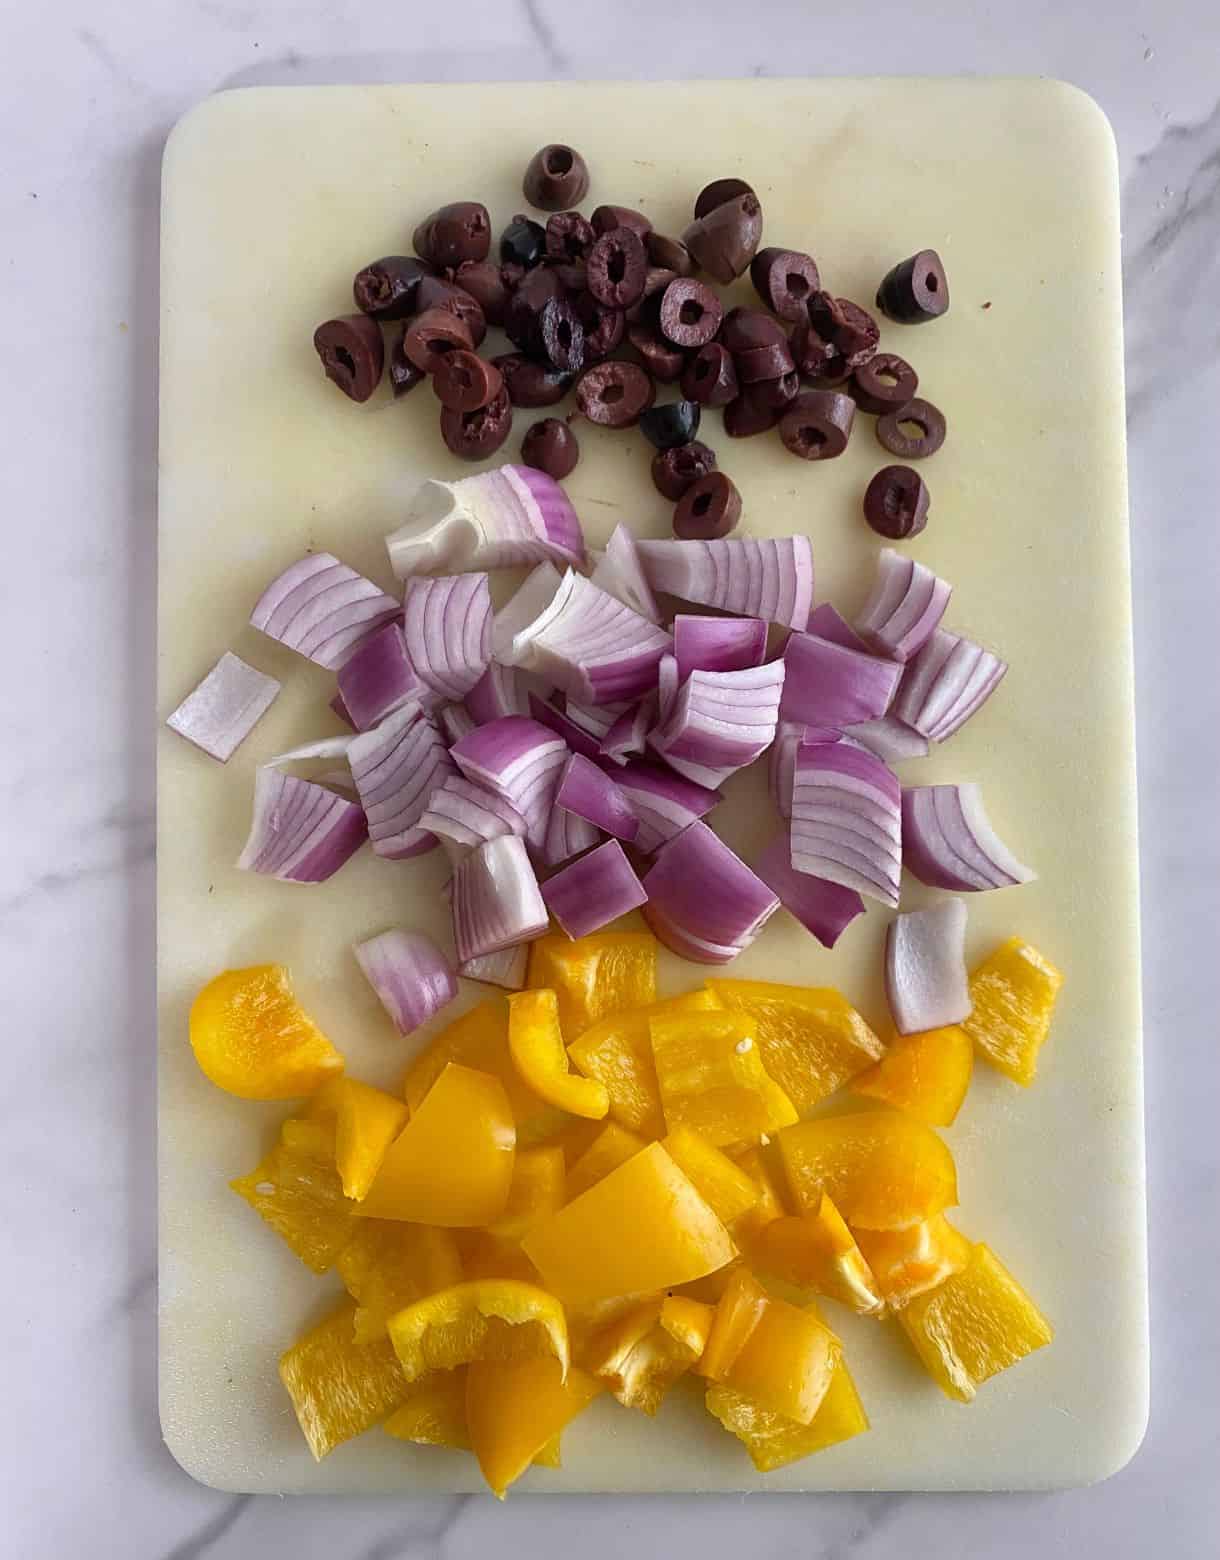 A cutting board with diced onion, bell pepper and sliced olives.